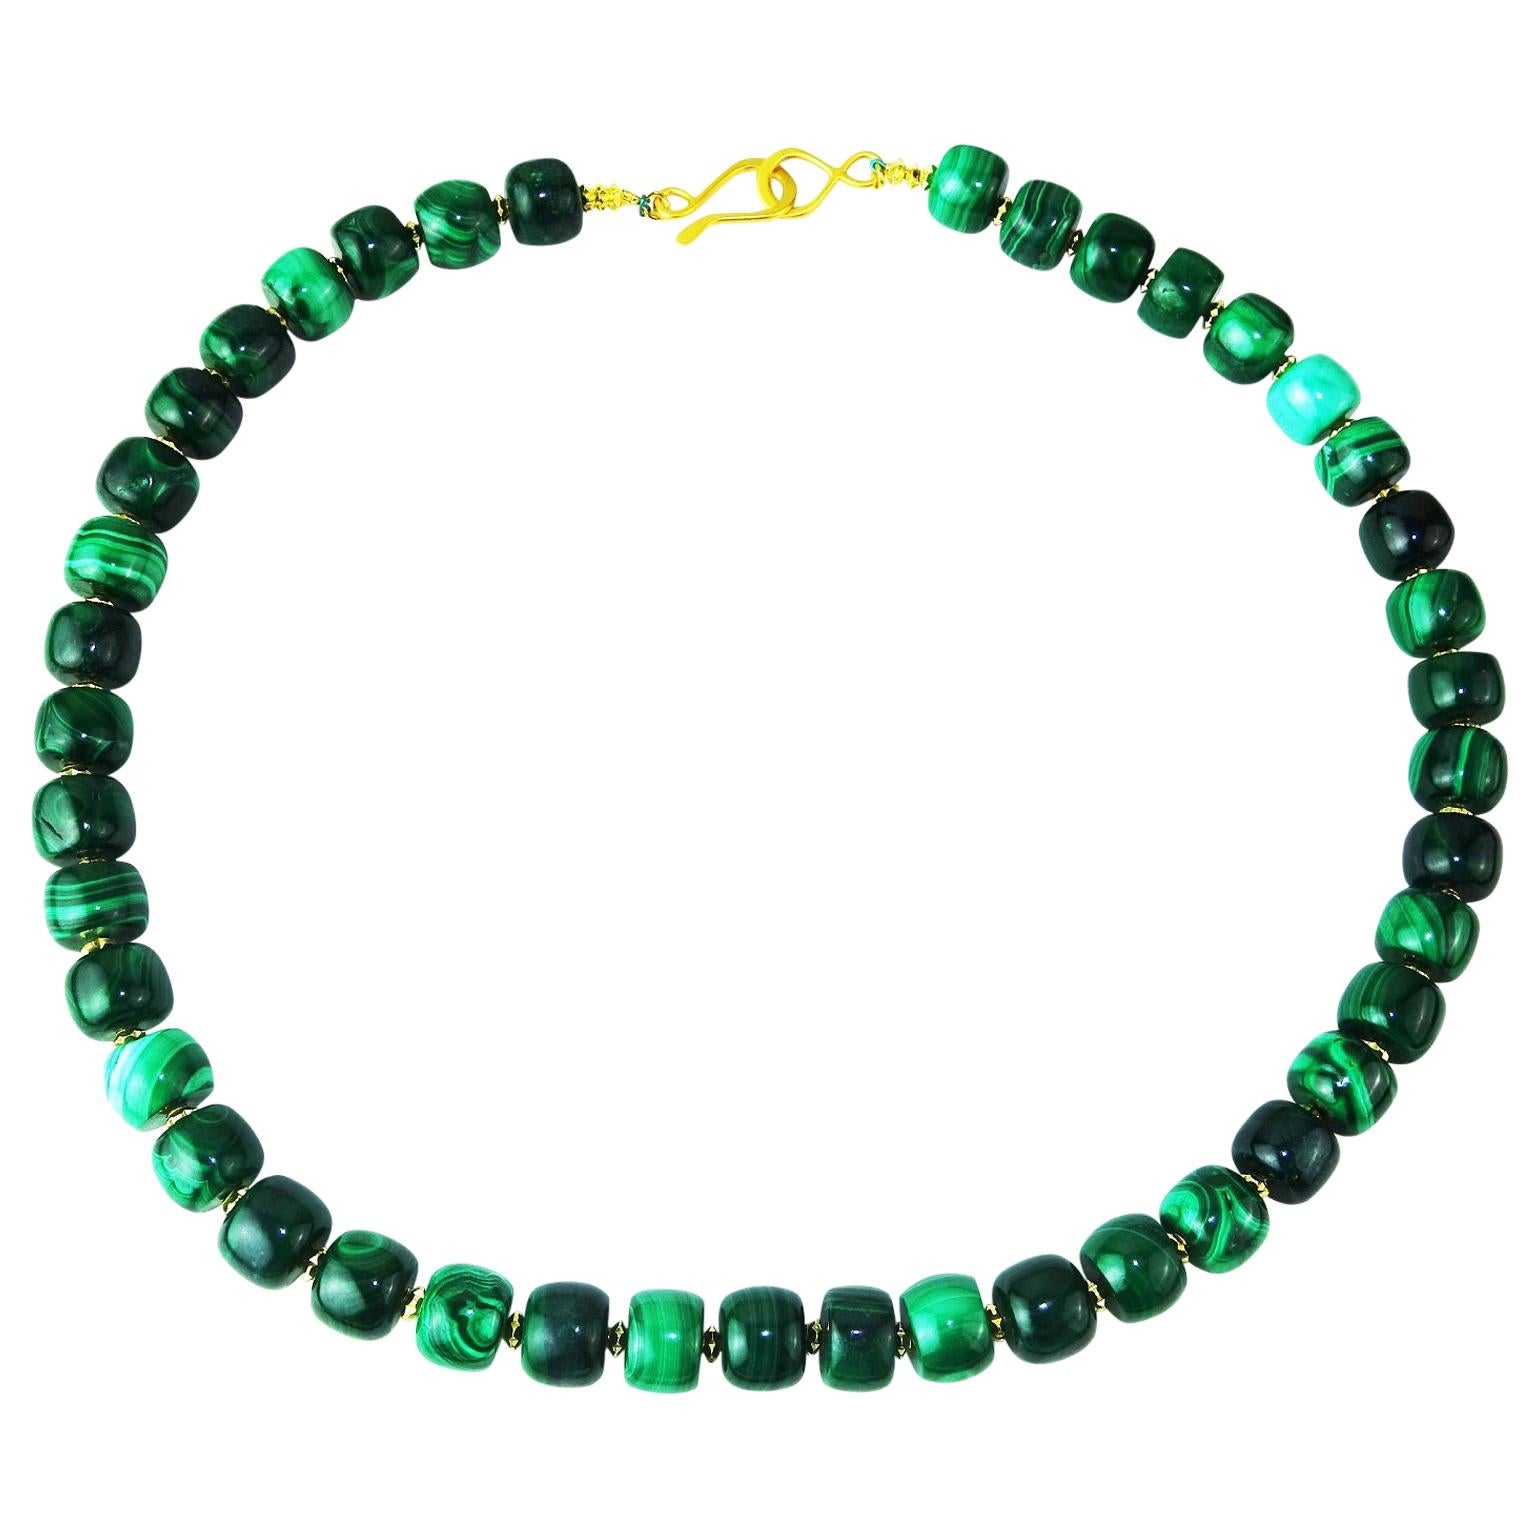 Feel elegant in green. 22 Inches of Beautifully polished barrel shaped Malachite Necklace. The gem barrel shape, a nice design change, is enhanced with gold tone fluted accents. The gold vermeil hook and figure eight clasp enriches the entire